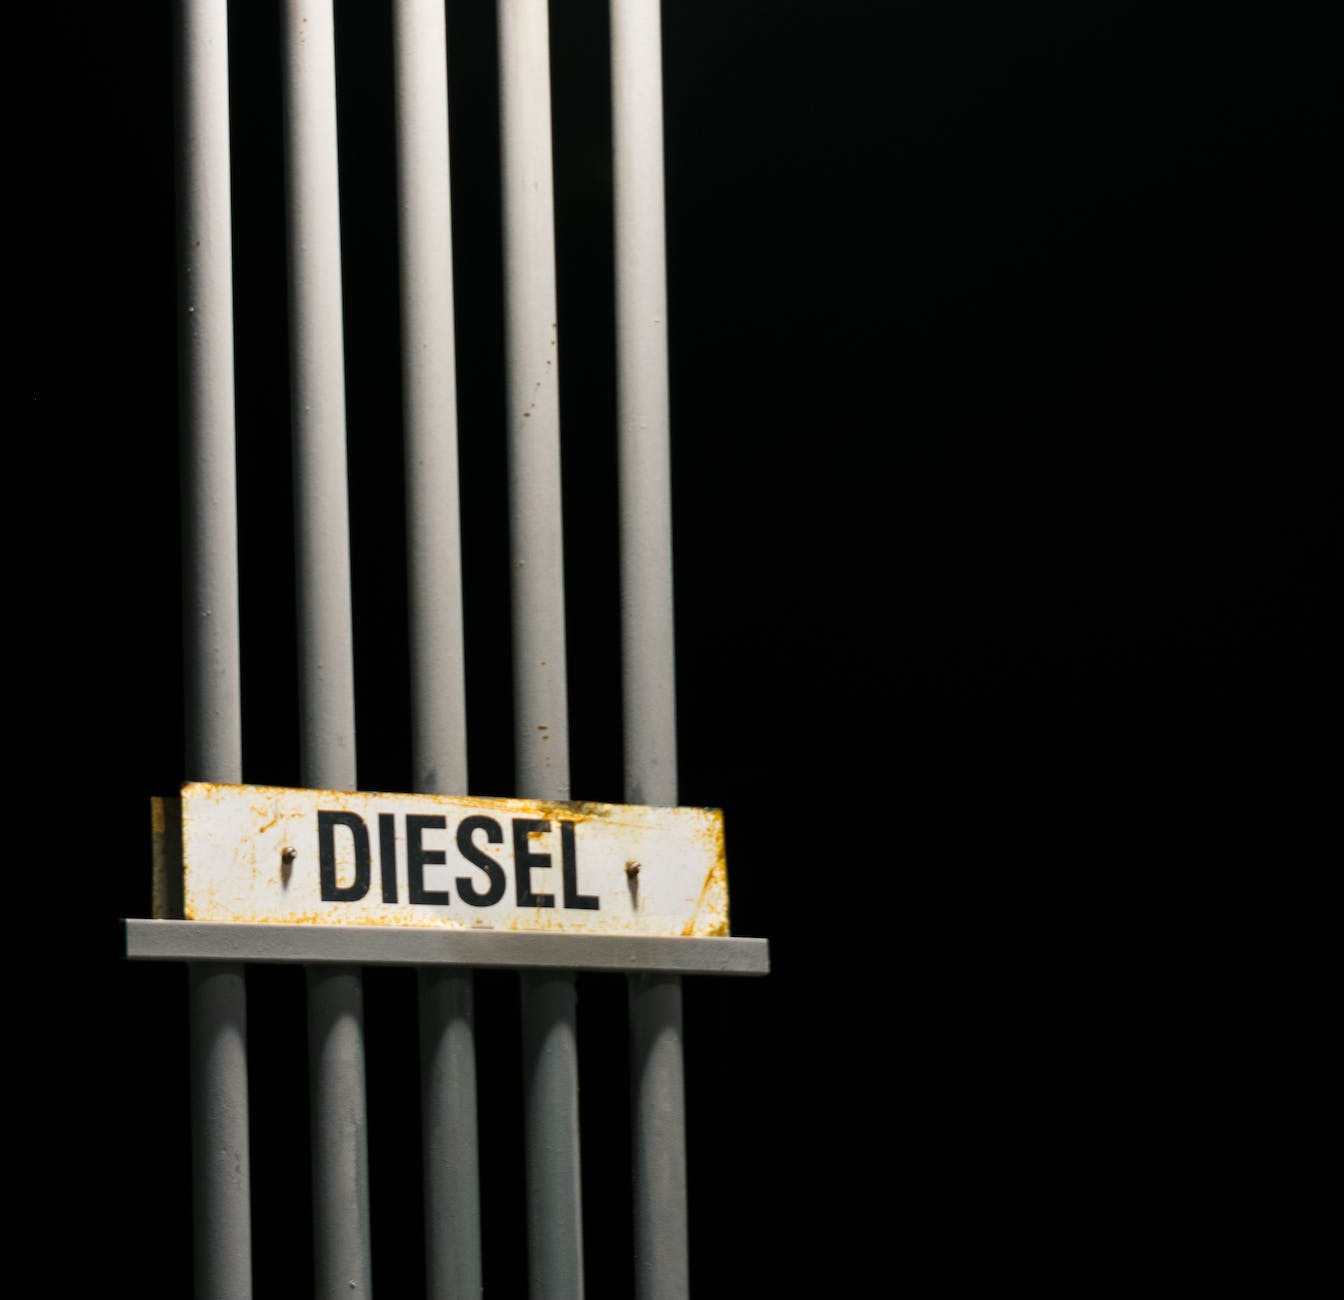 Featured image for “Biden Administration Urged to Increase Domestic Diesel Production ”